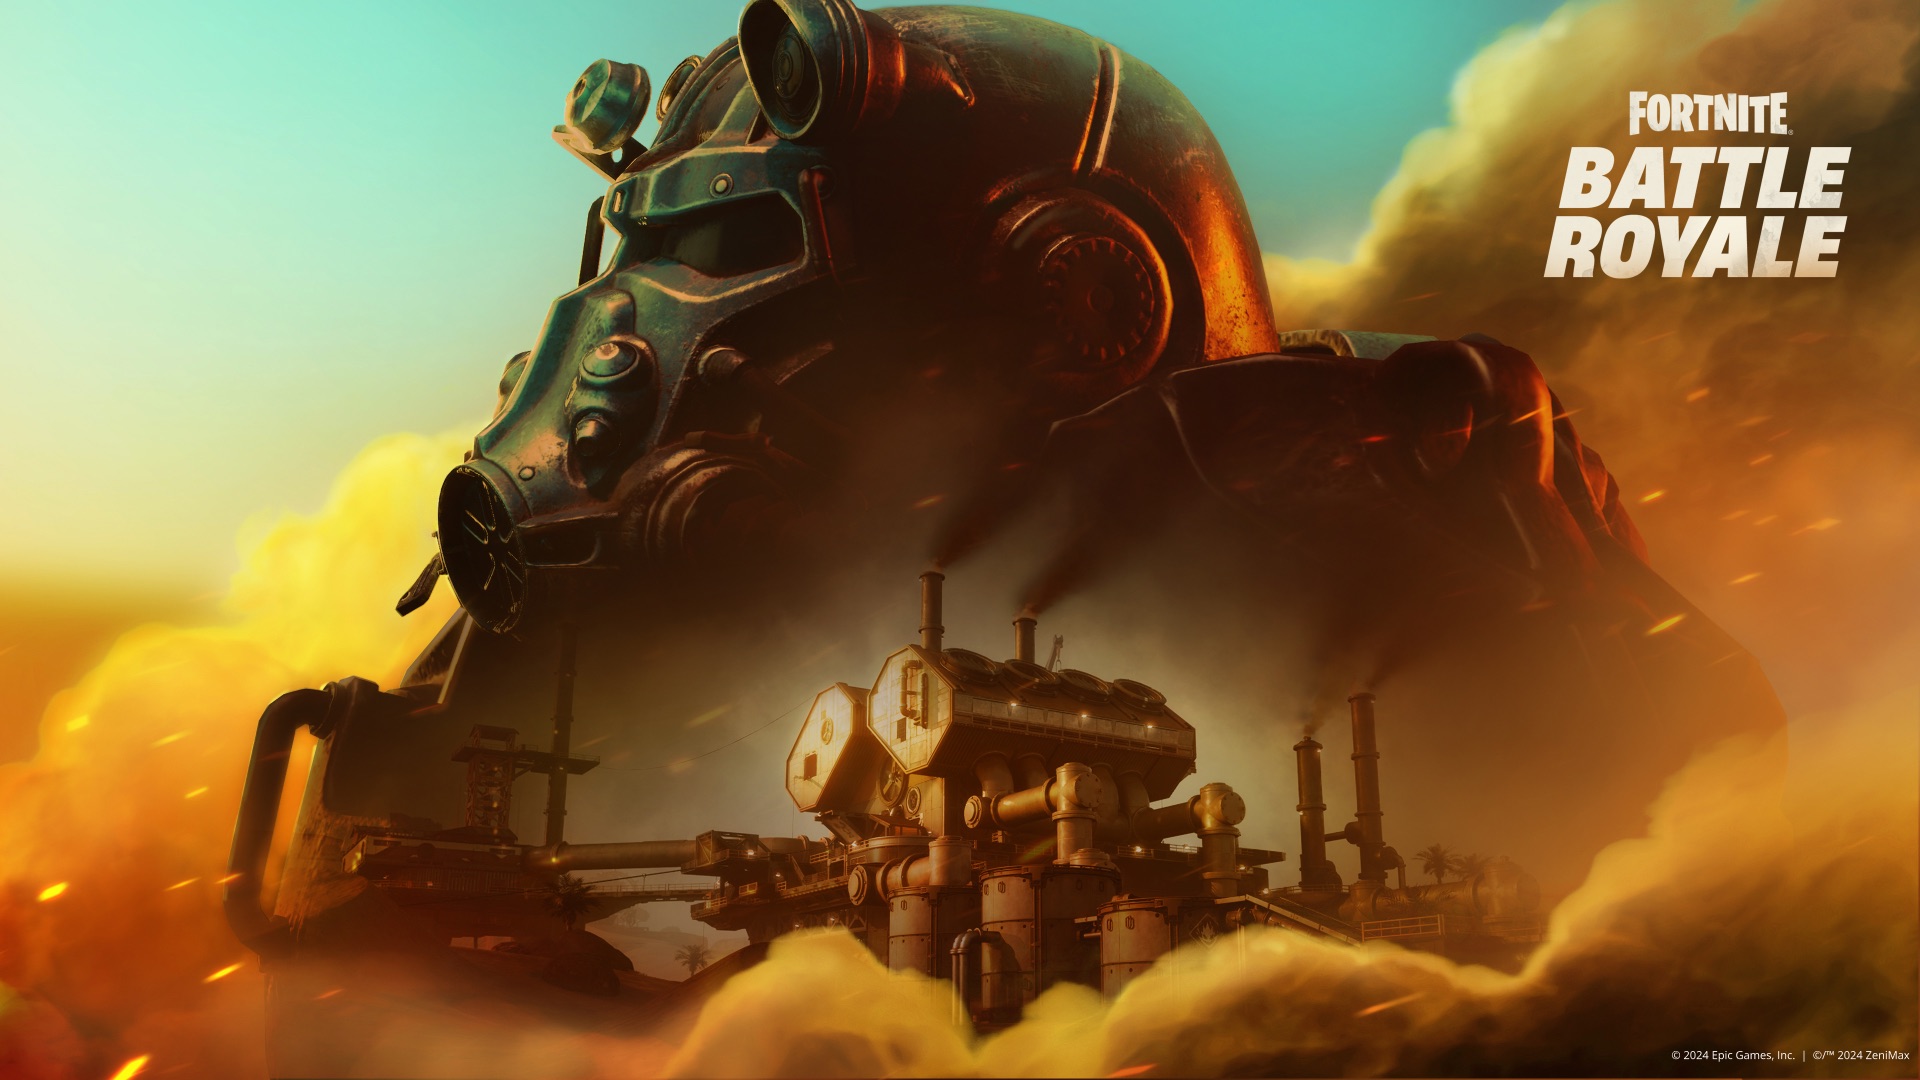 A power armor helmet from Fallout looms over a steam engine in key art for Fortnite Chapter 5 Season 3.